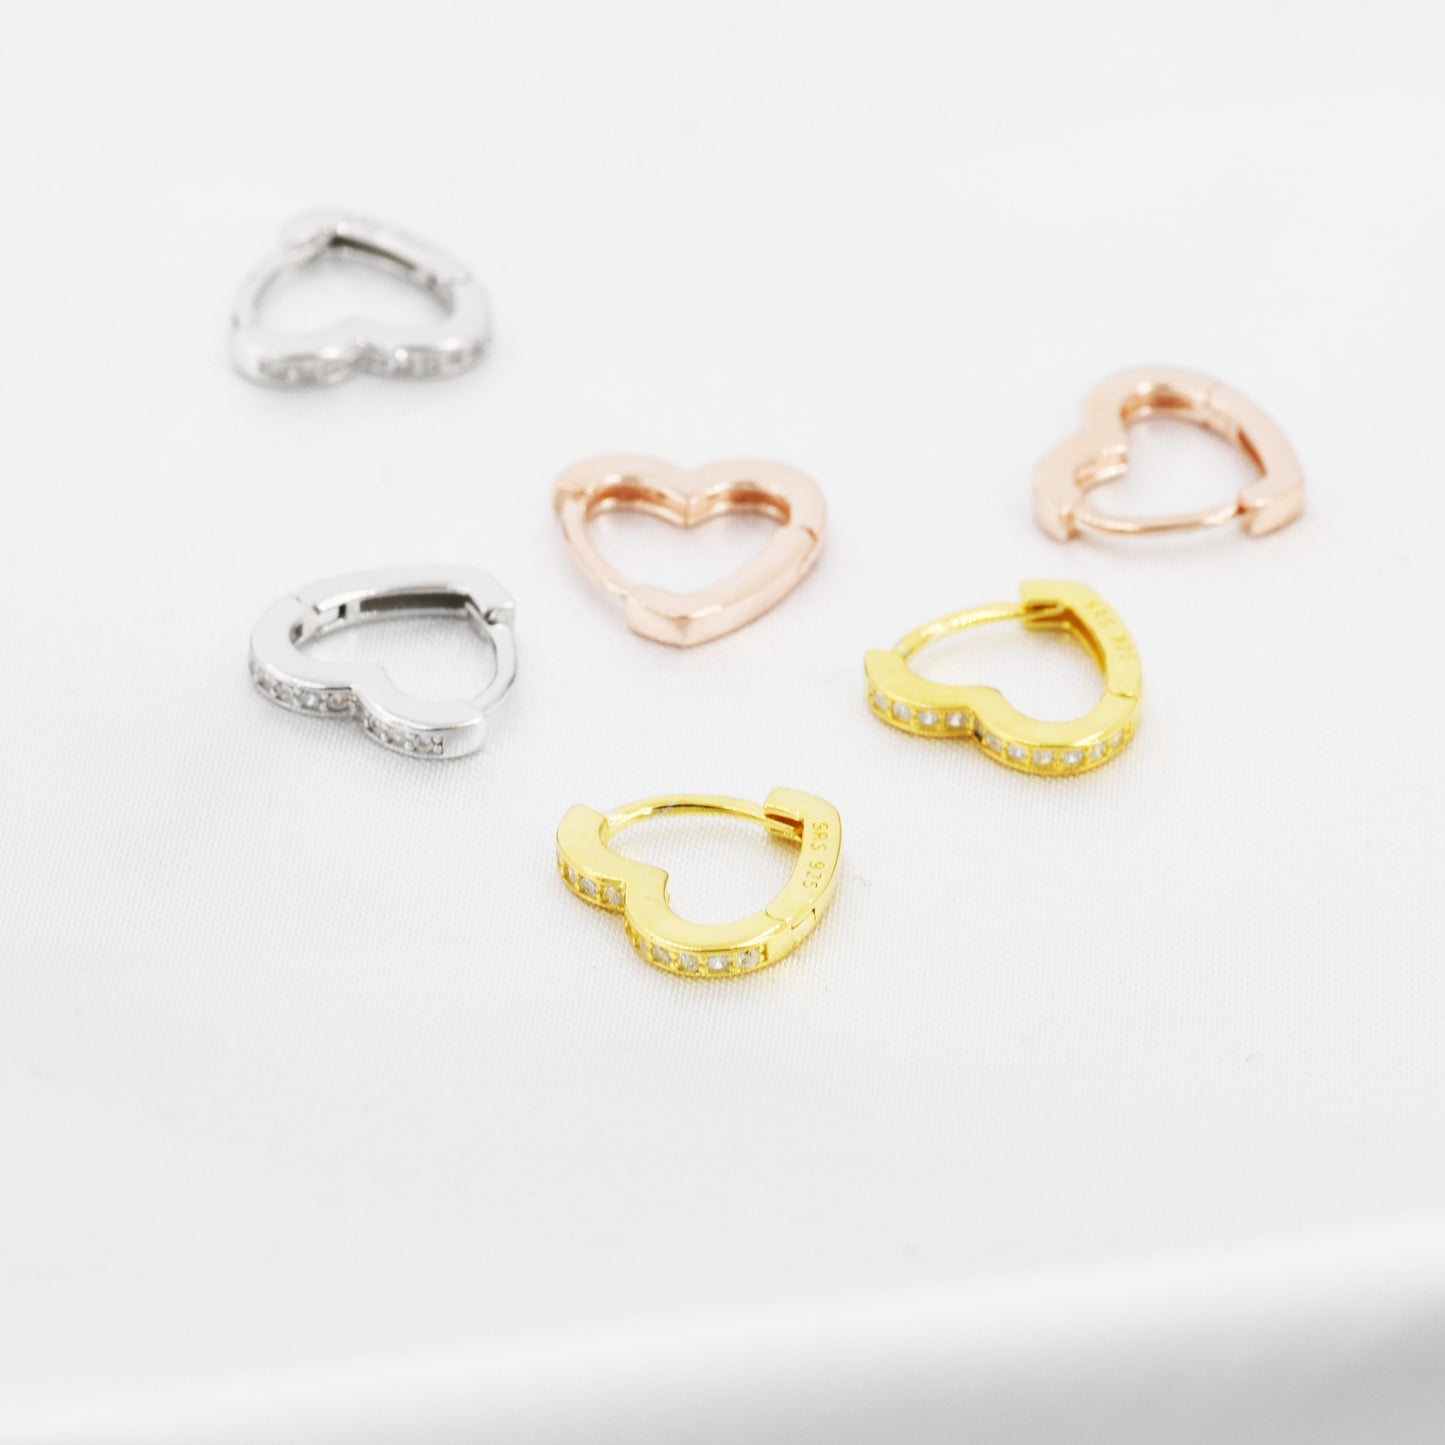 CZ Heart Huggie Hoop Earrings in Sterling Silver, Silver, Gold or Rose Gold with CZ Crystals, Minimalist Geometric Design